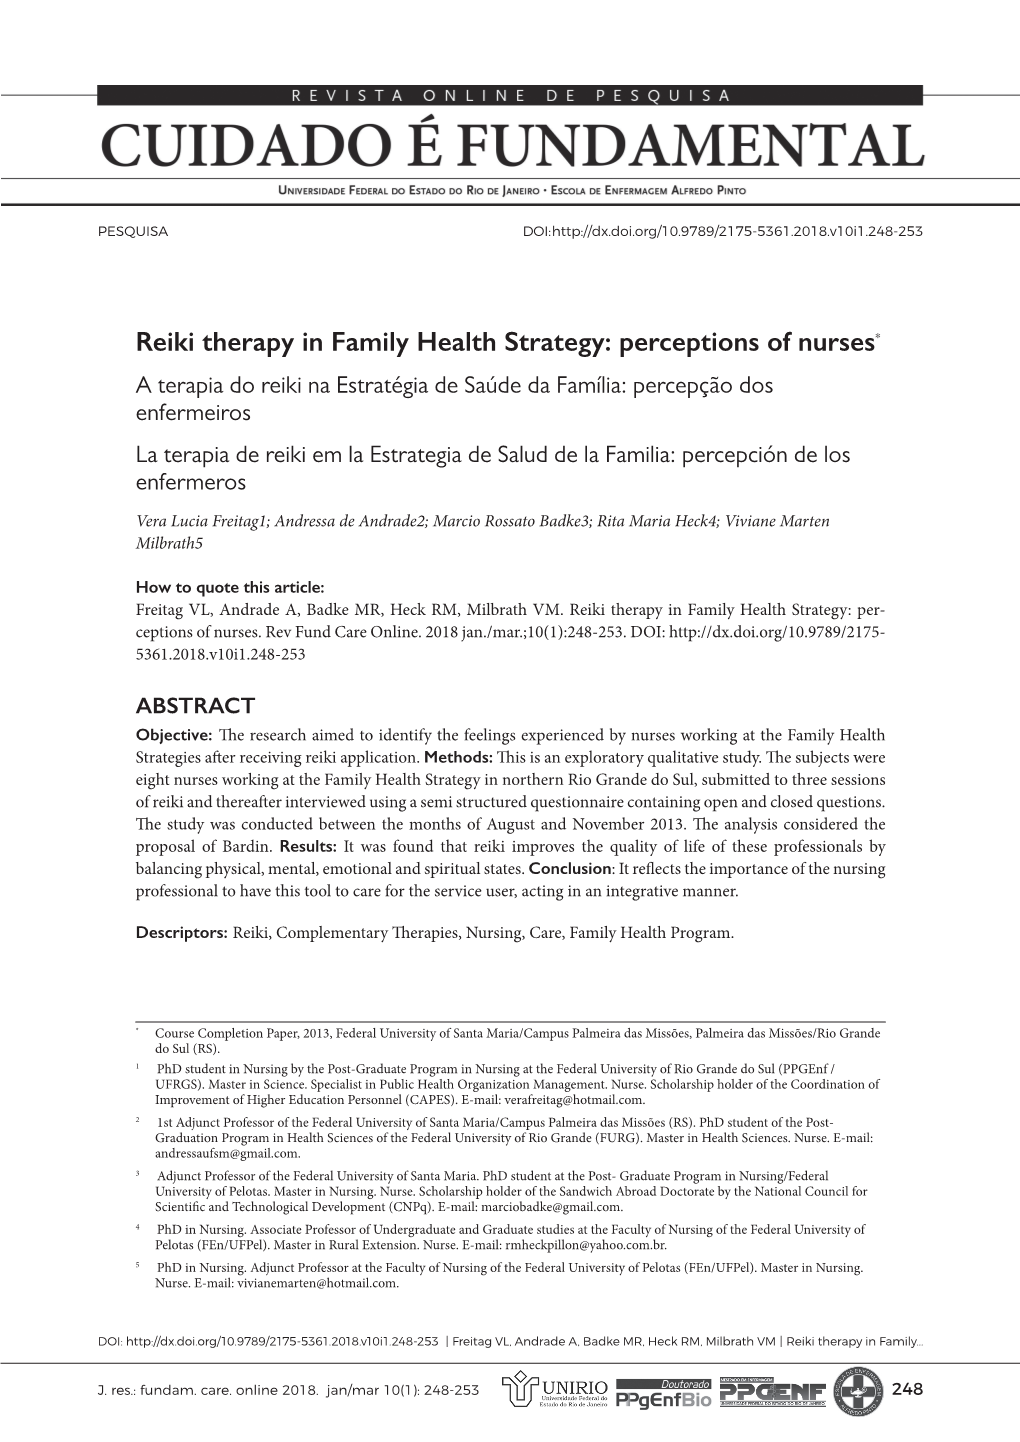 Reiki Therapy in Family Health Strategy